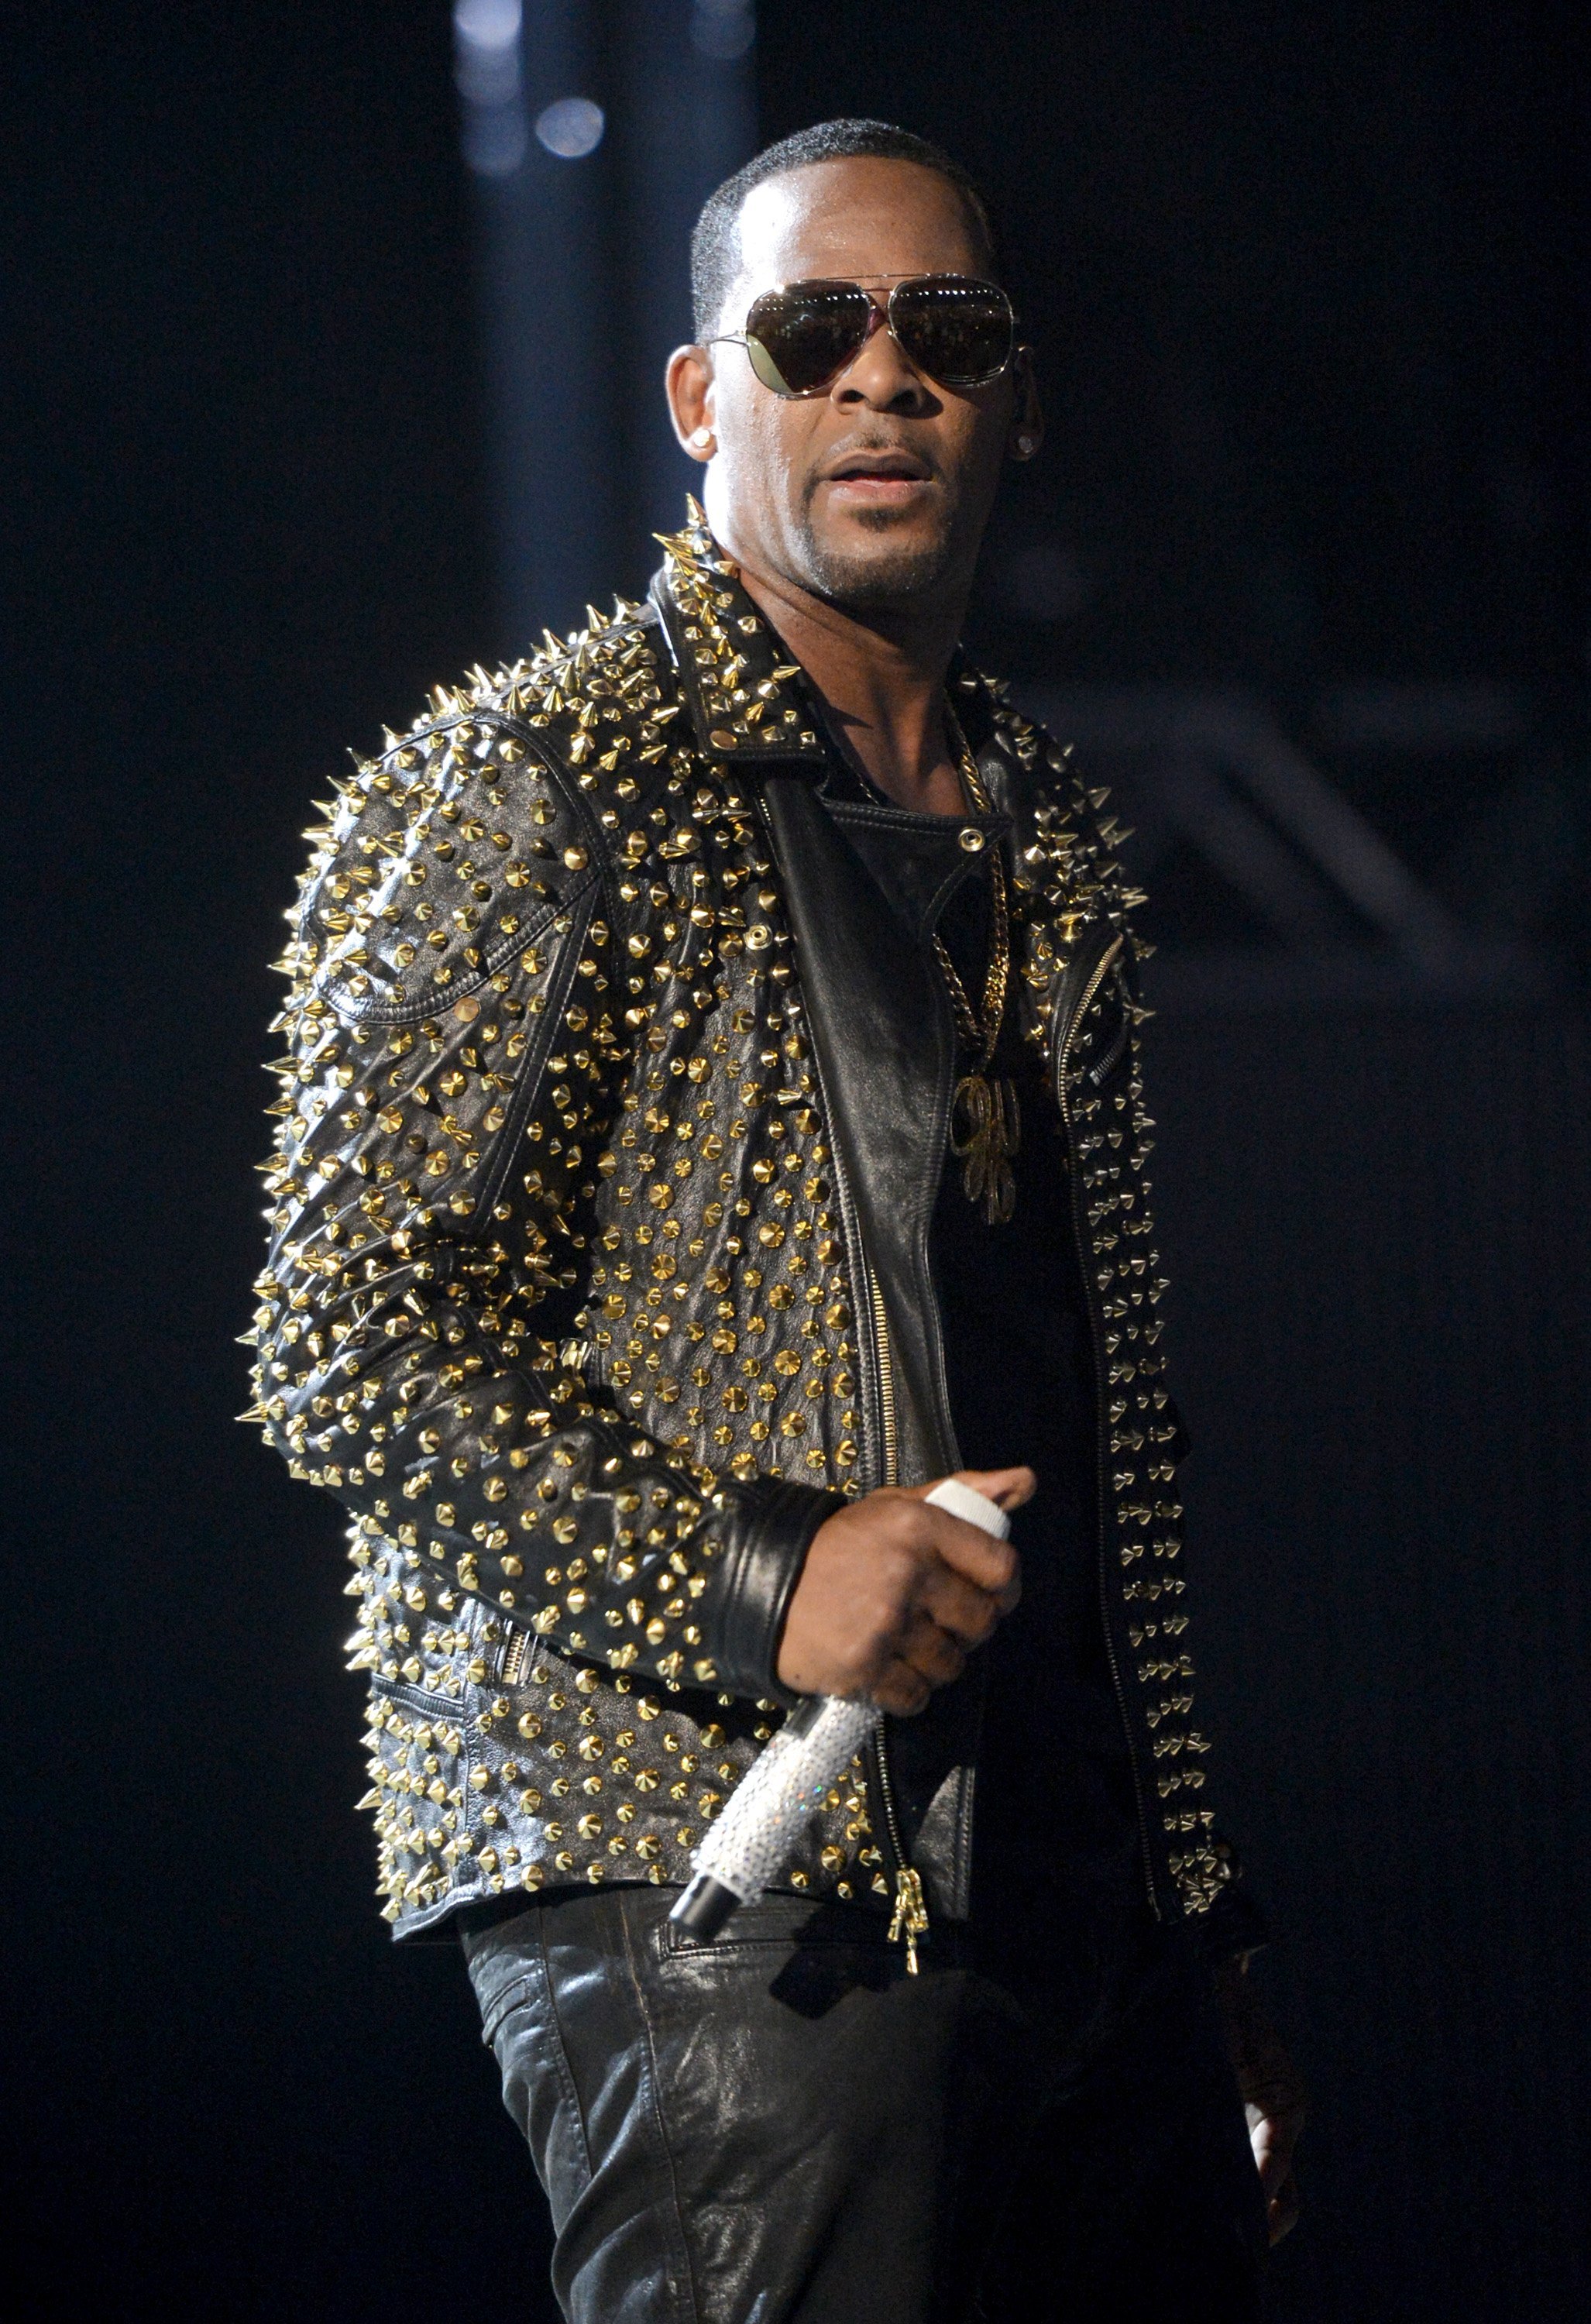 R. Kelly performs onstage during the BET Awards on June 30, 2013 in Los Angeles, California | Photo: Getty Images